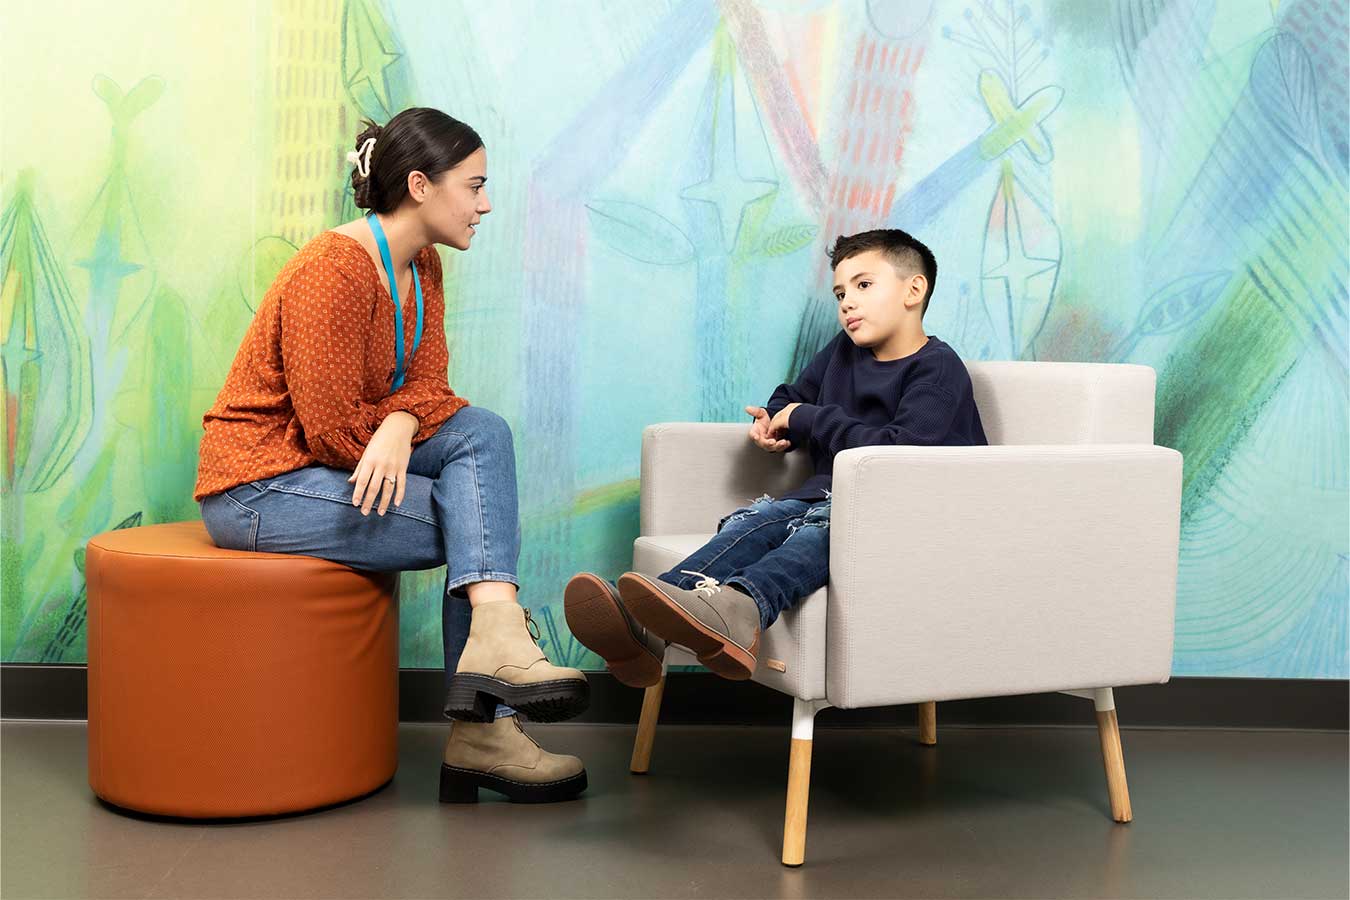 Doctor in orange sweater consults with a young patient in front of a colorful mural wall